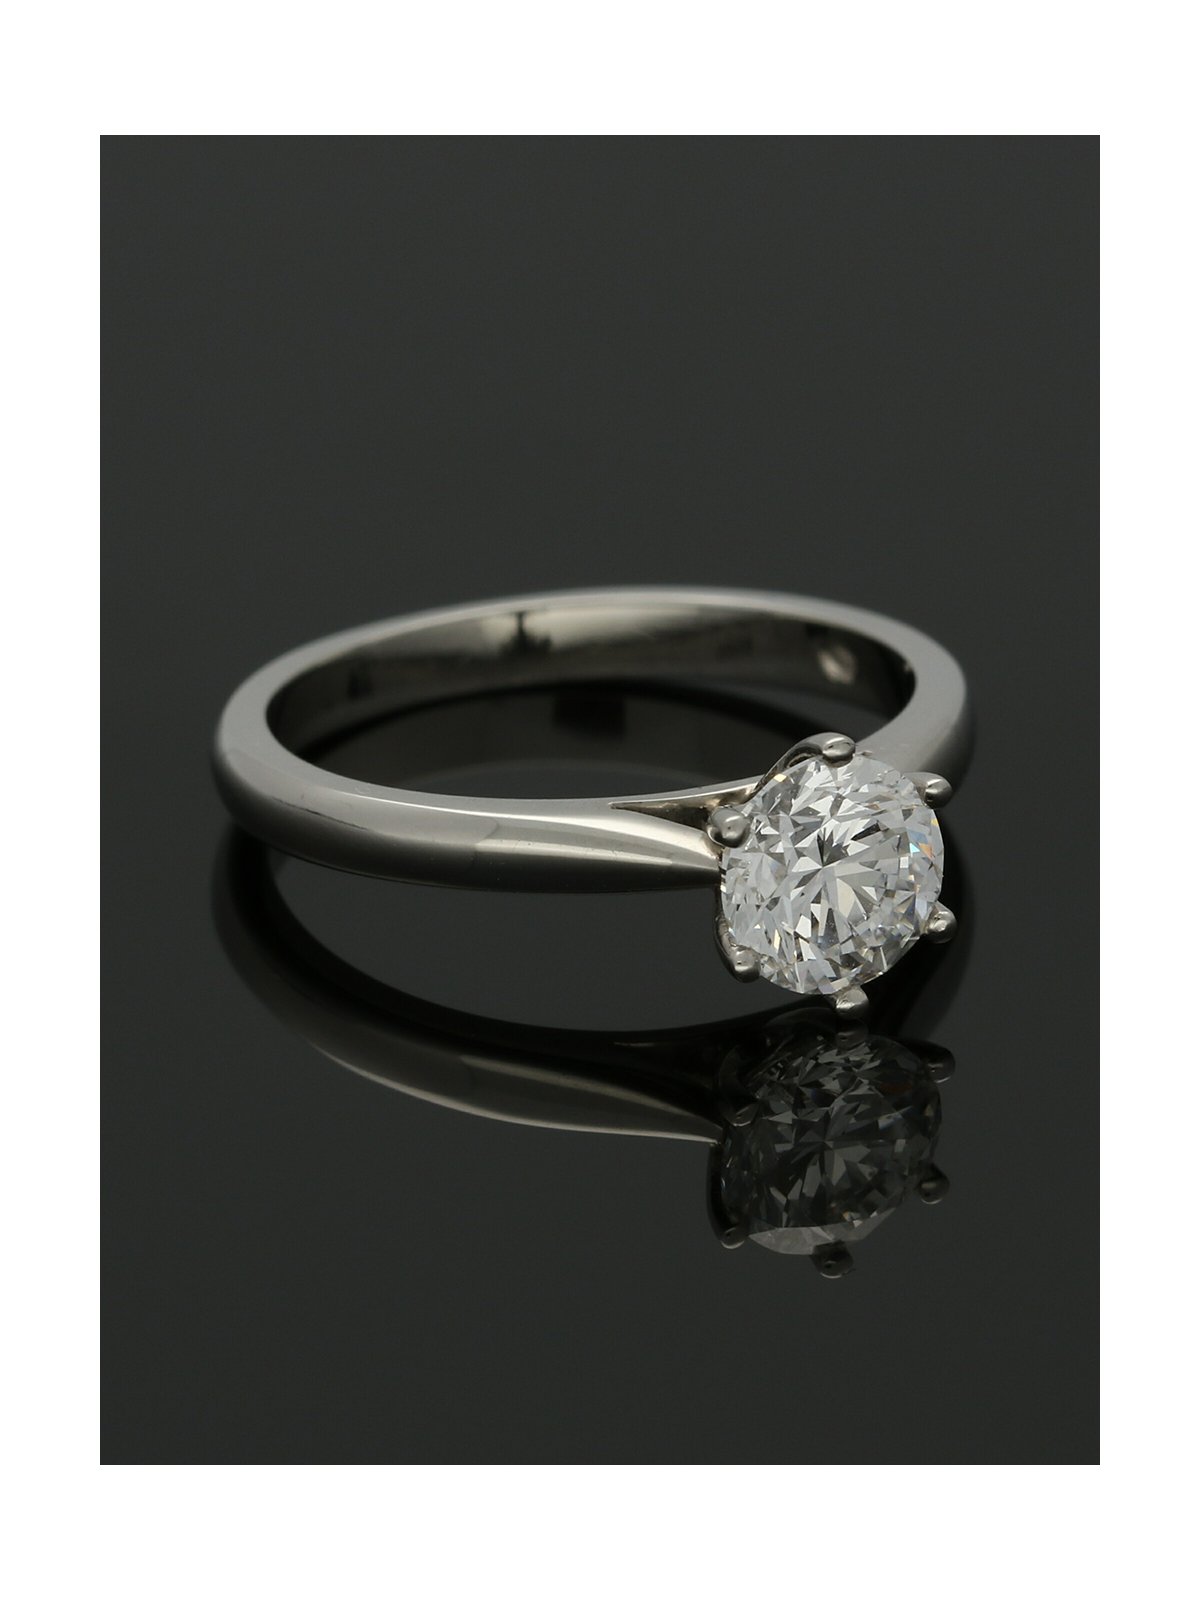 Diamond Solitaire Engagement Ring "The Beatrice Collection" 1.00ct Certificated Round Brilliant Cut in Platinum